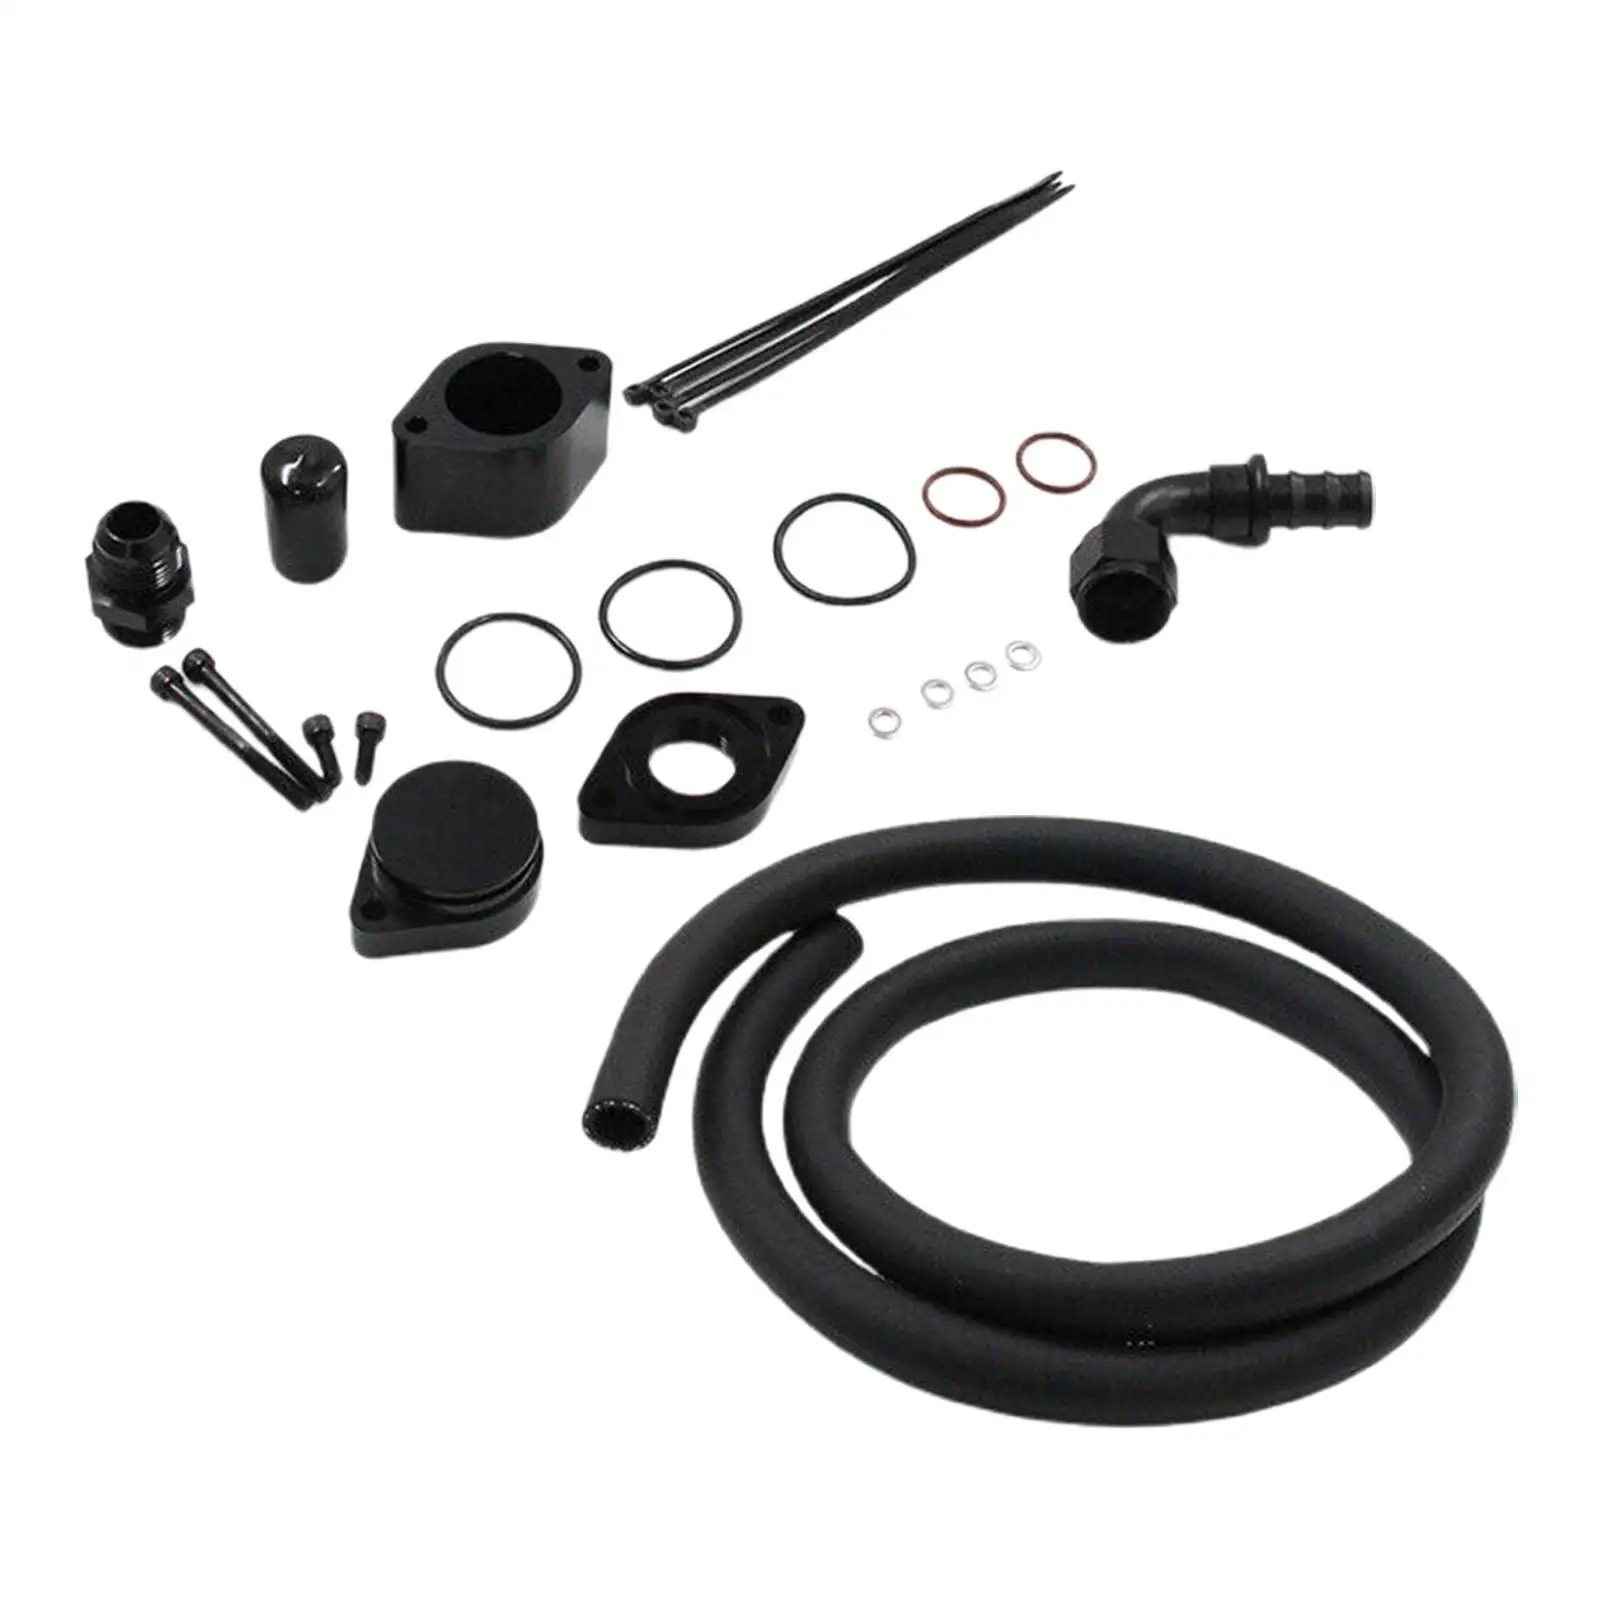 Pcv Reroute Engine Ventilation Kit Durable for Ford 11-20 6.7L Powerstroke Diesel F-250 F-450 F-350 Accessory